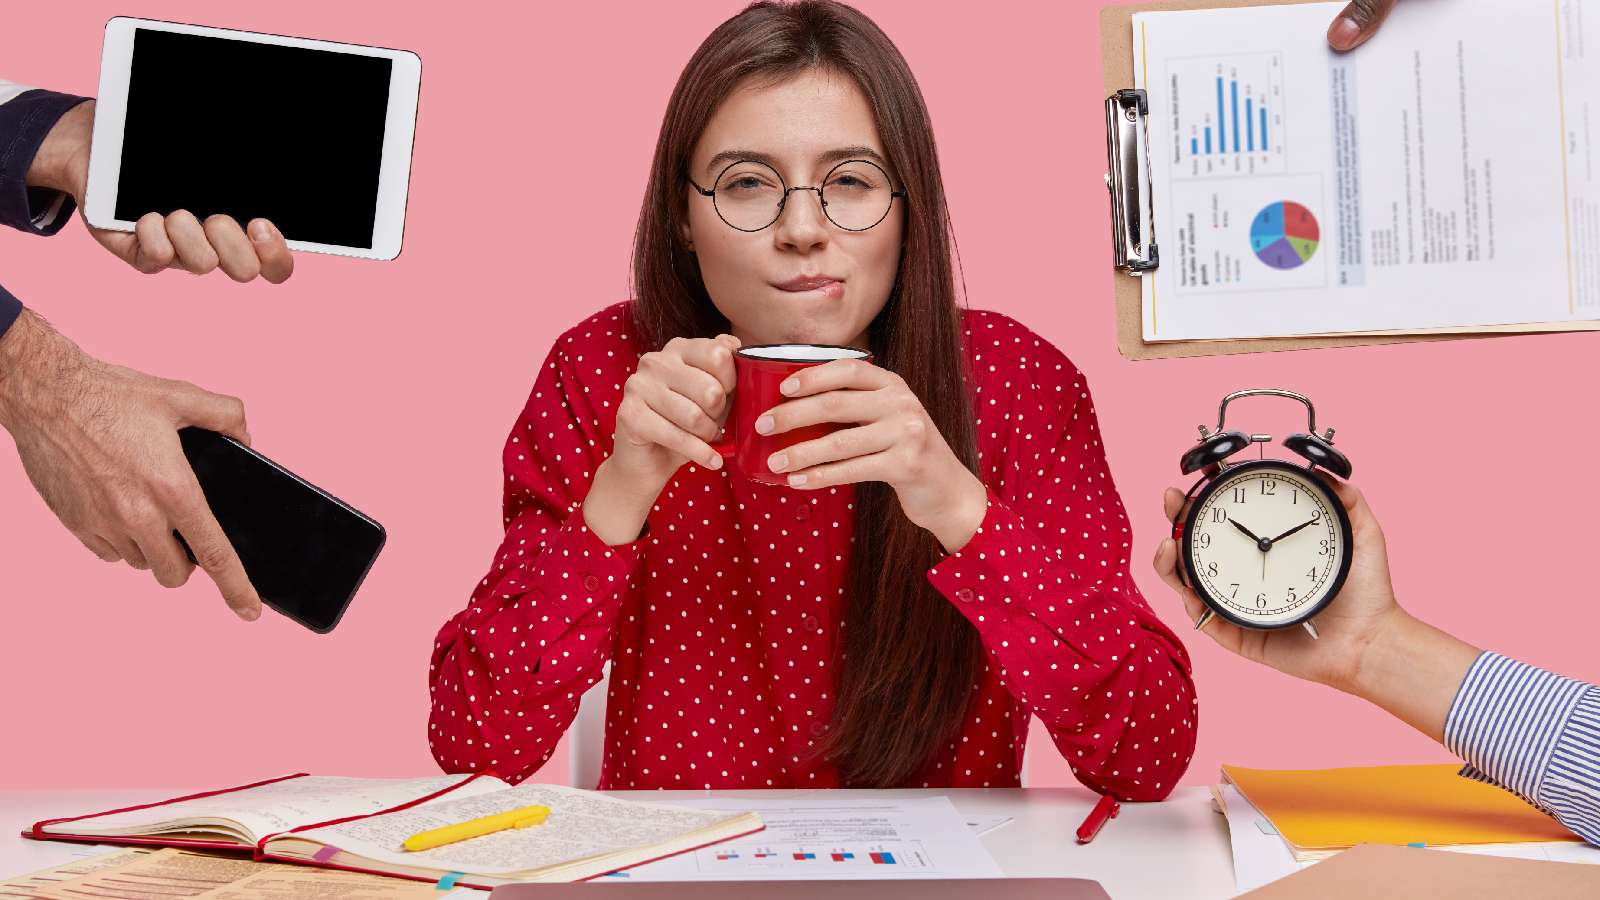 How to stop being a workaholic: 11 tips for work-life